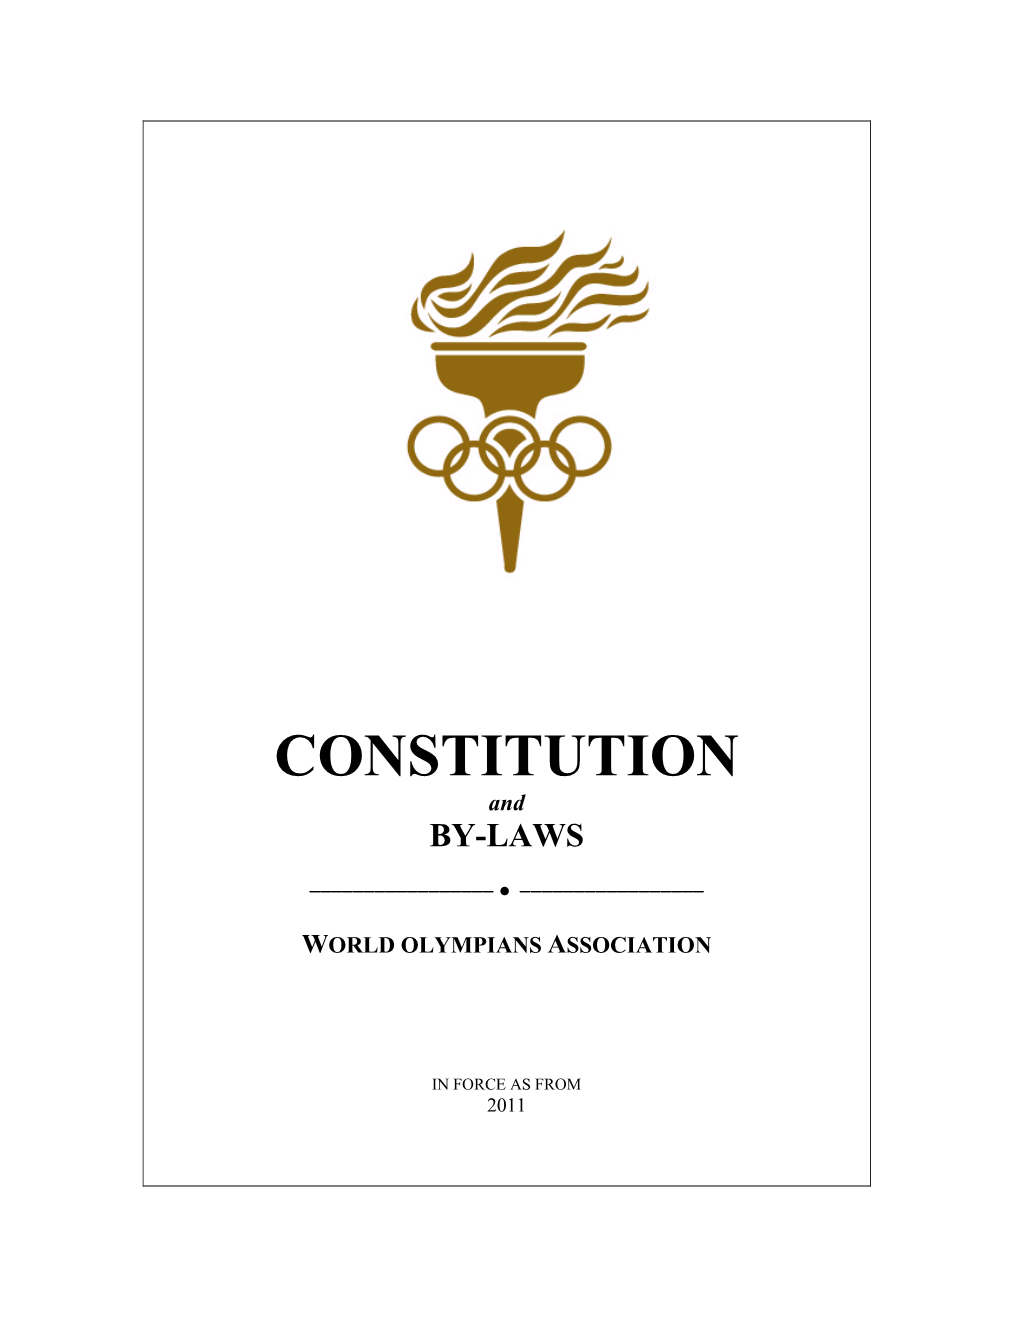 CONSTITUTION and BY-LAWS